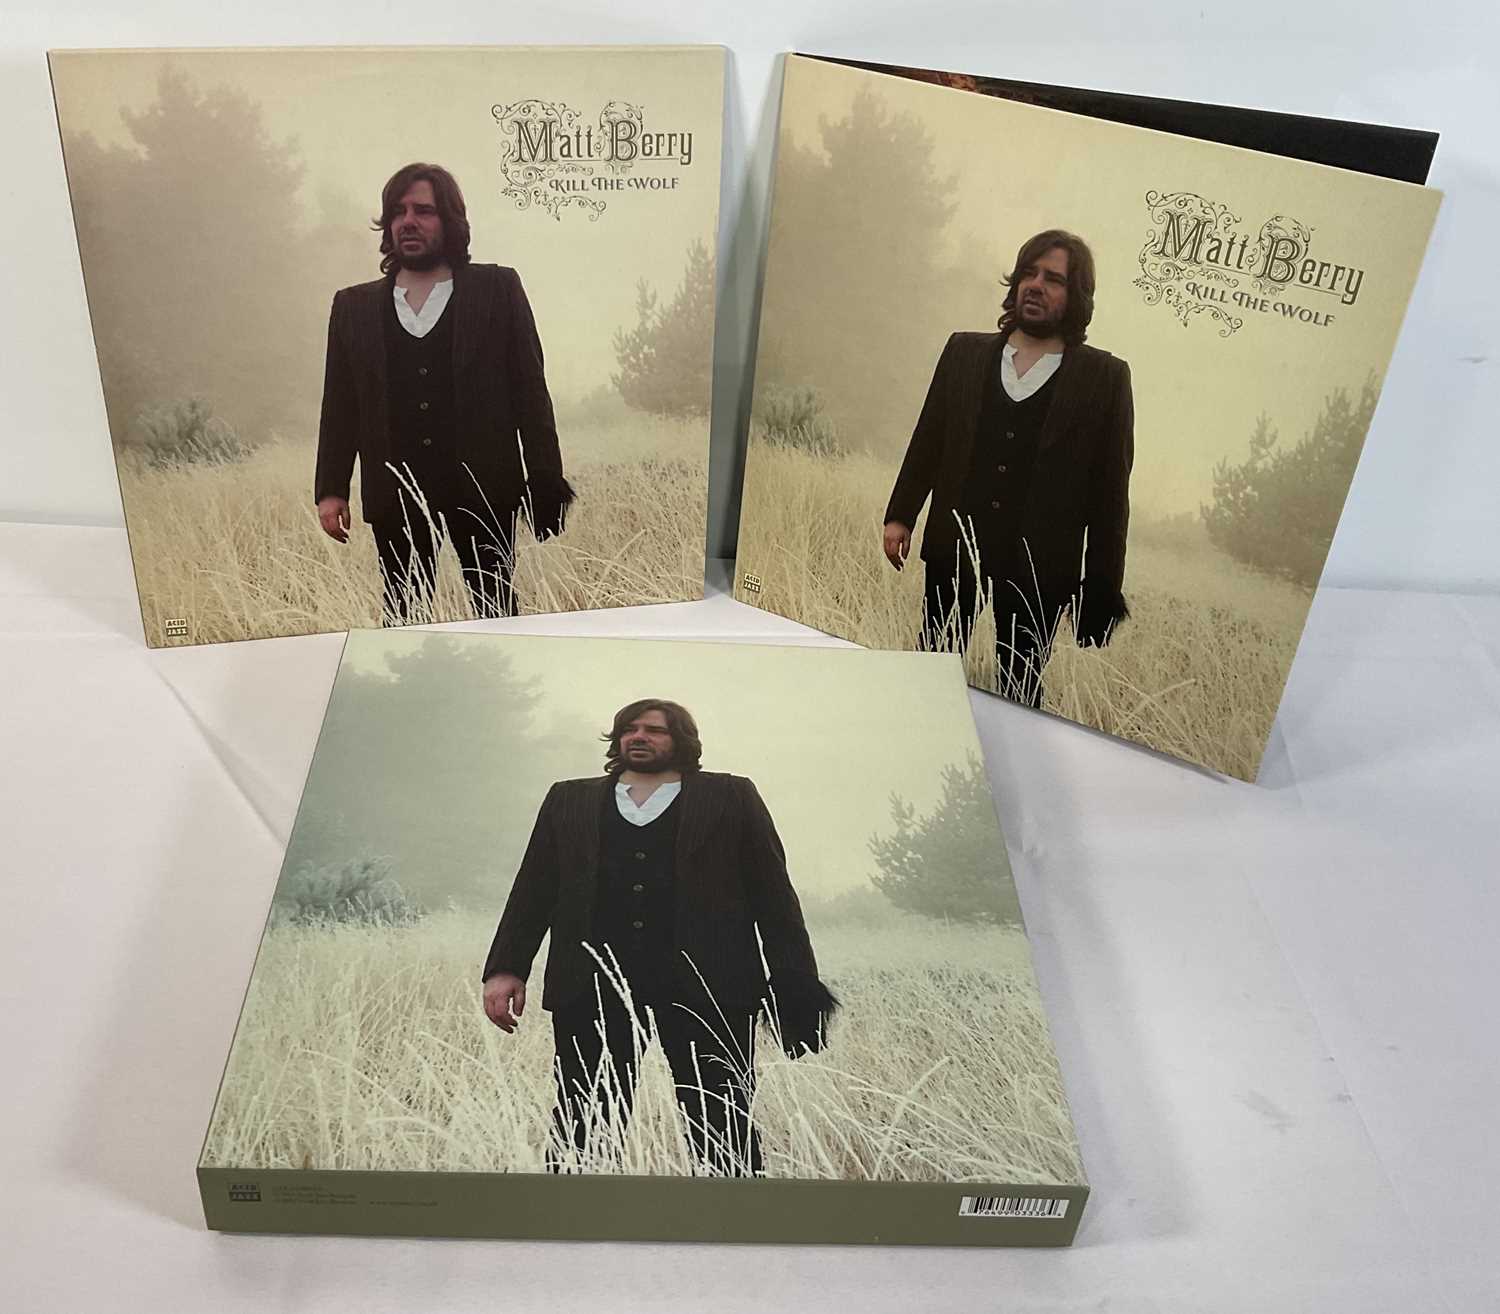 VINYL RECORDS - MATT BERRY: Three versions of the 2013 album Kill The Wolf including a limited